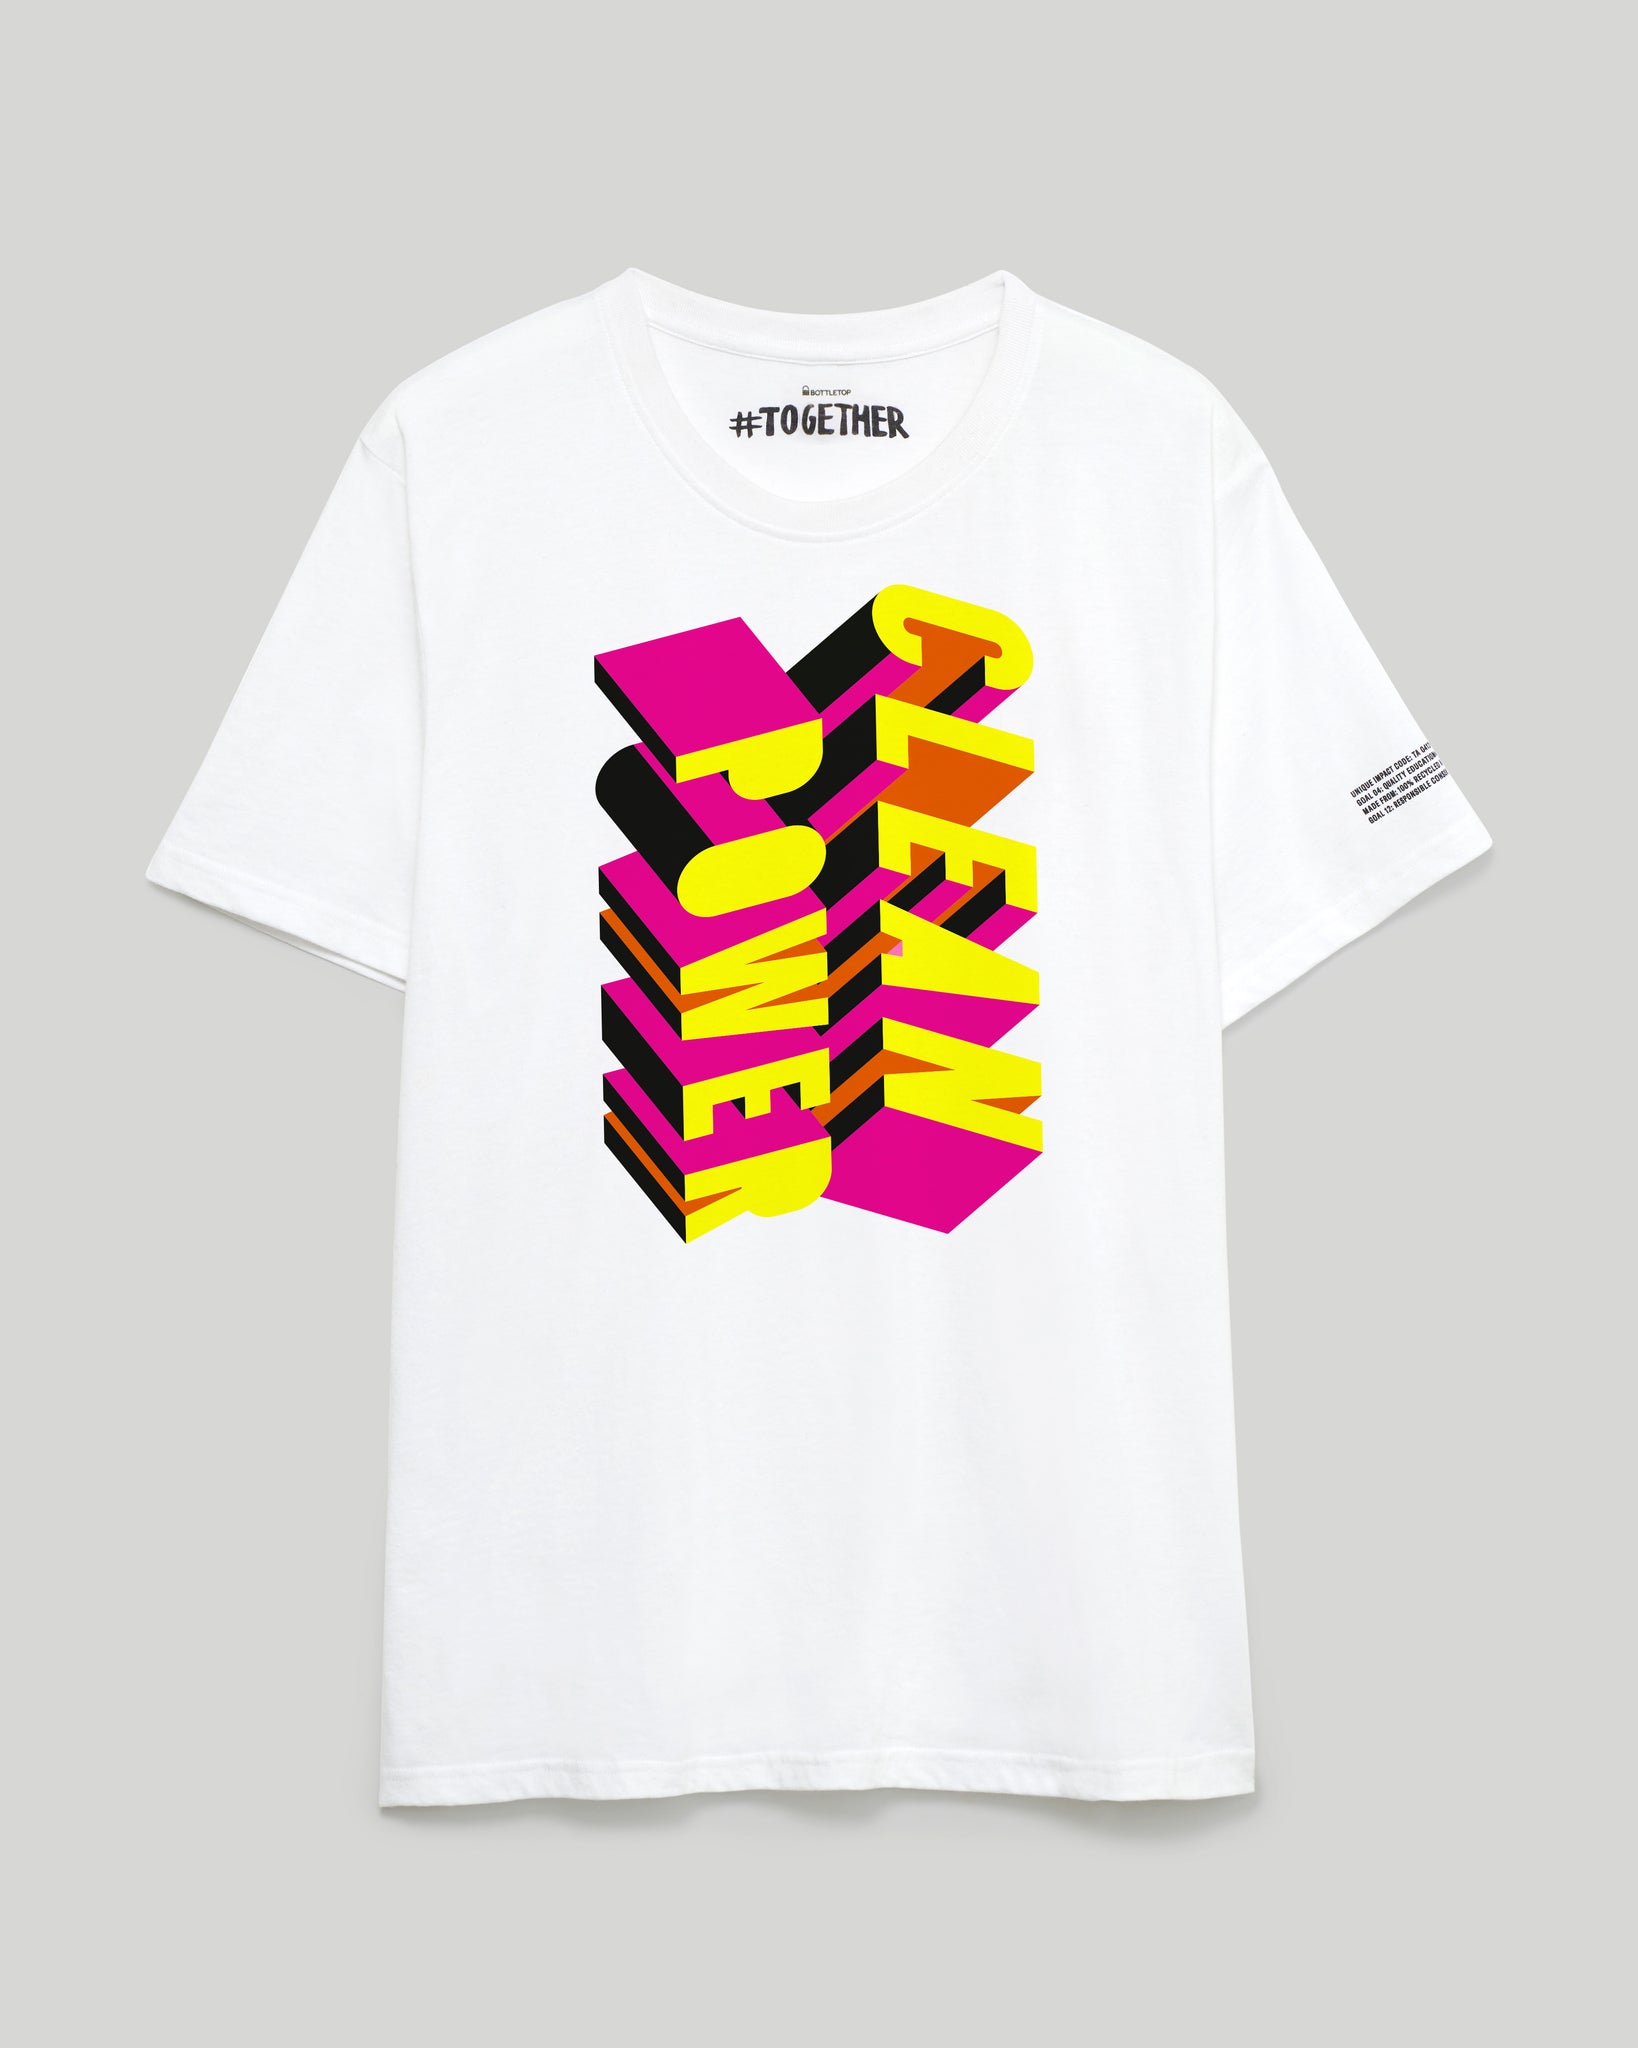 #TOGETHER x Morag Myerscough - Clean Power Tee